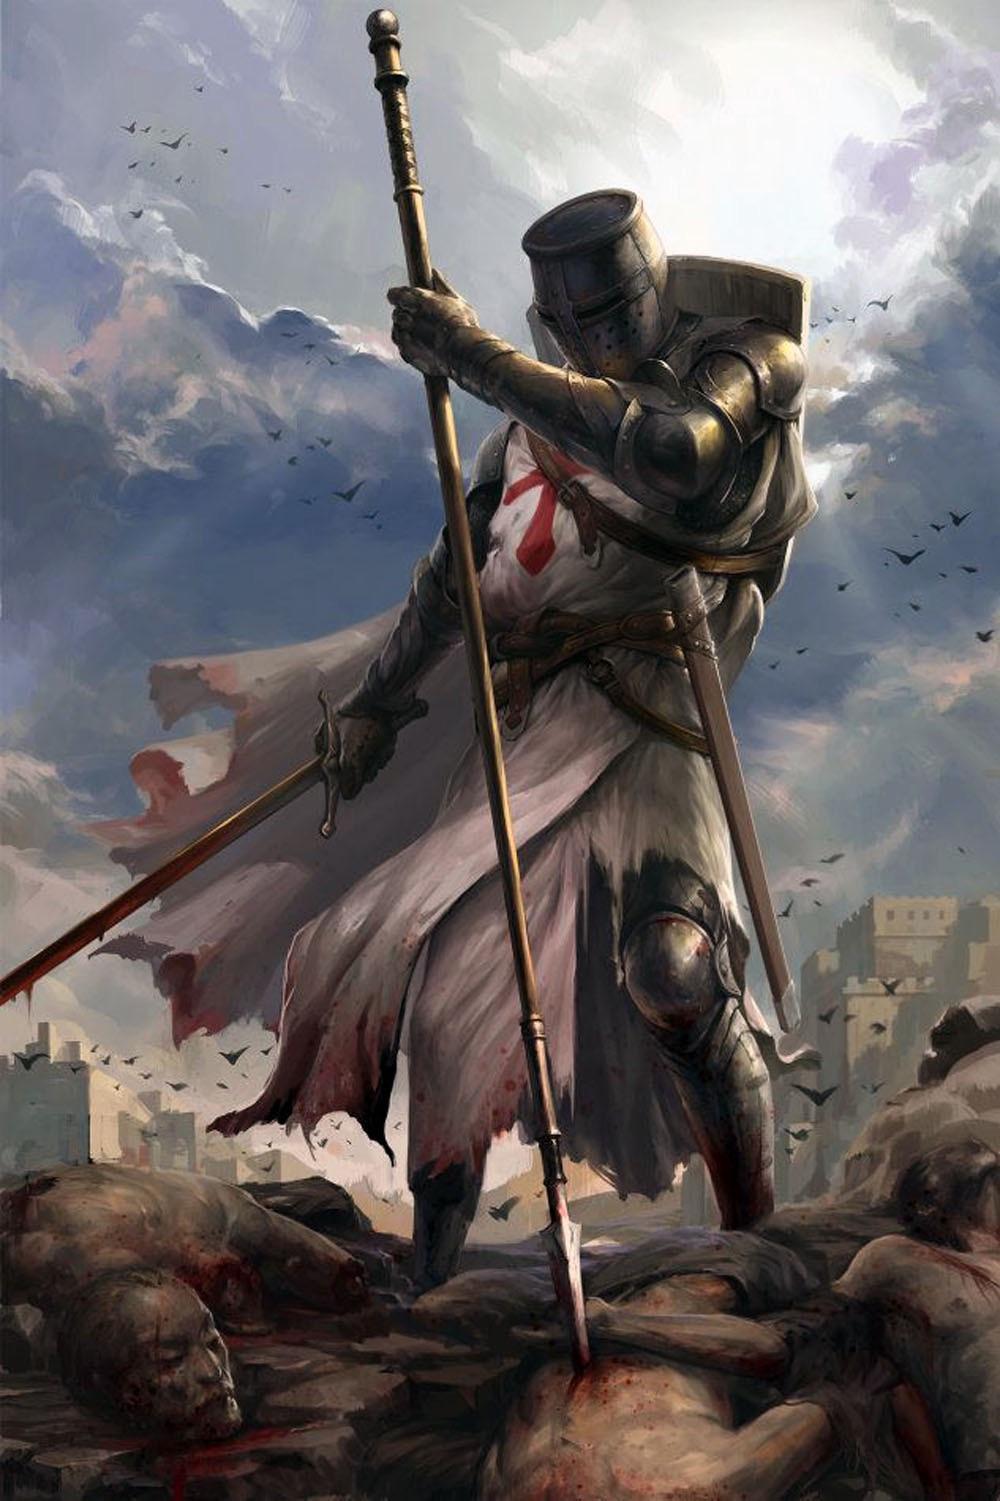 Download Crusade wallpapers for mobile phone free Crusade HD pictures